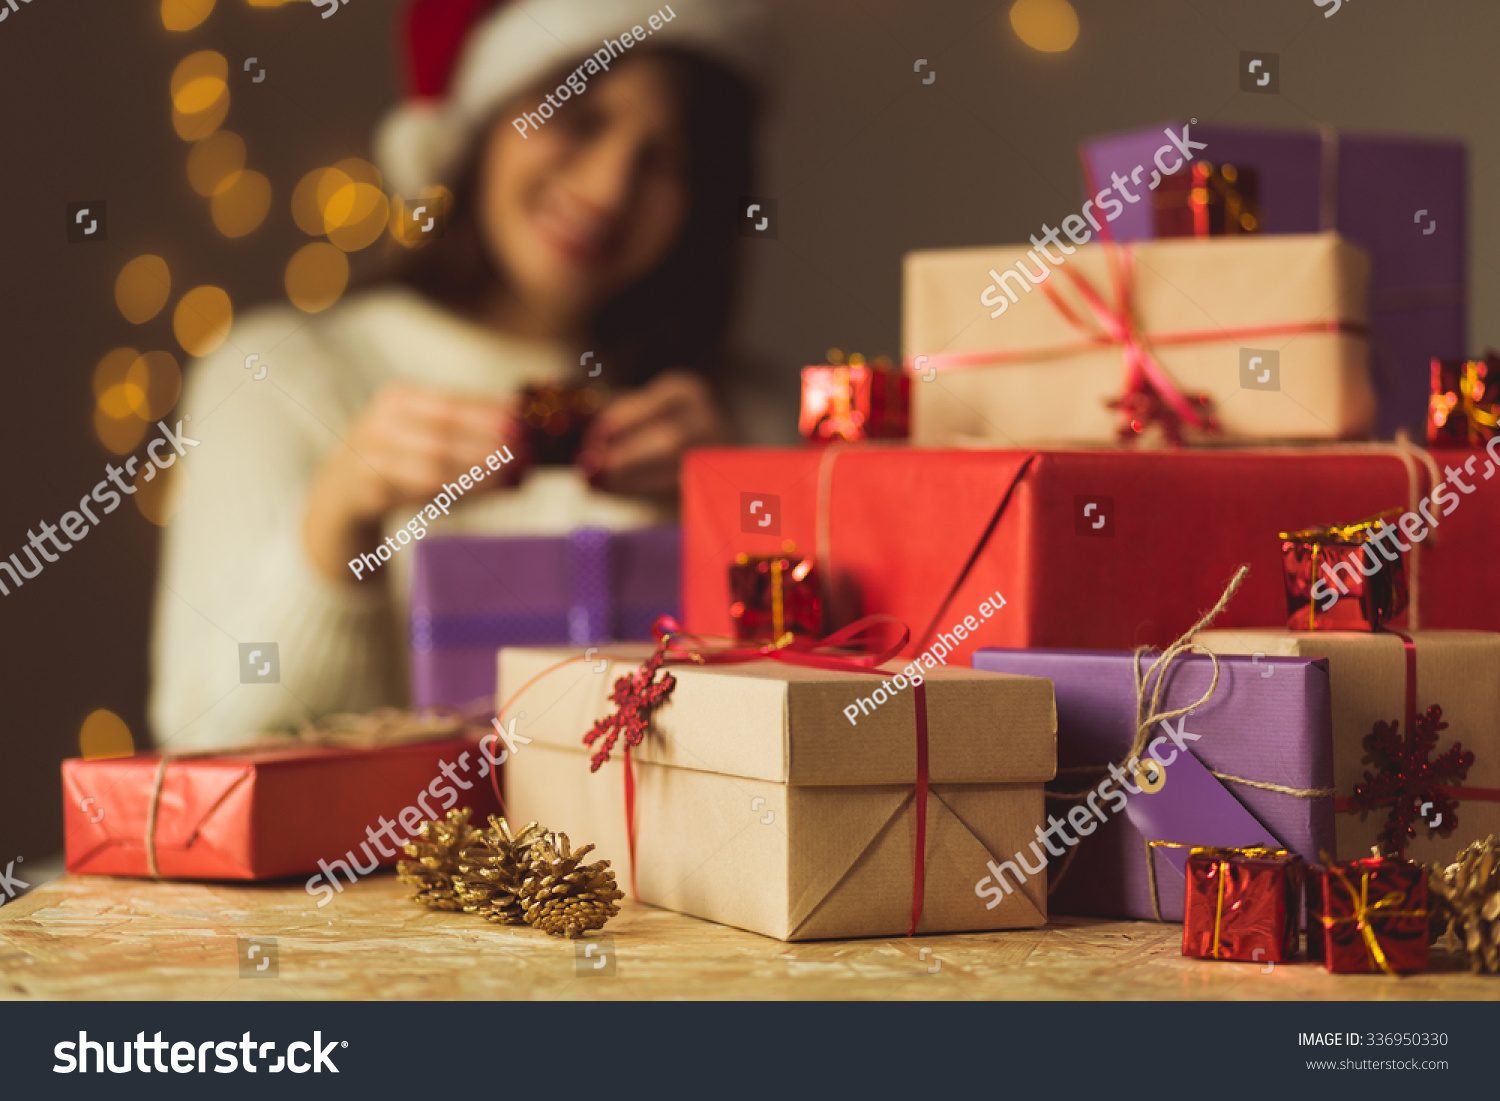 Image of smiling girl opening Christmas presents #336950330